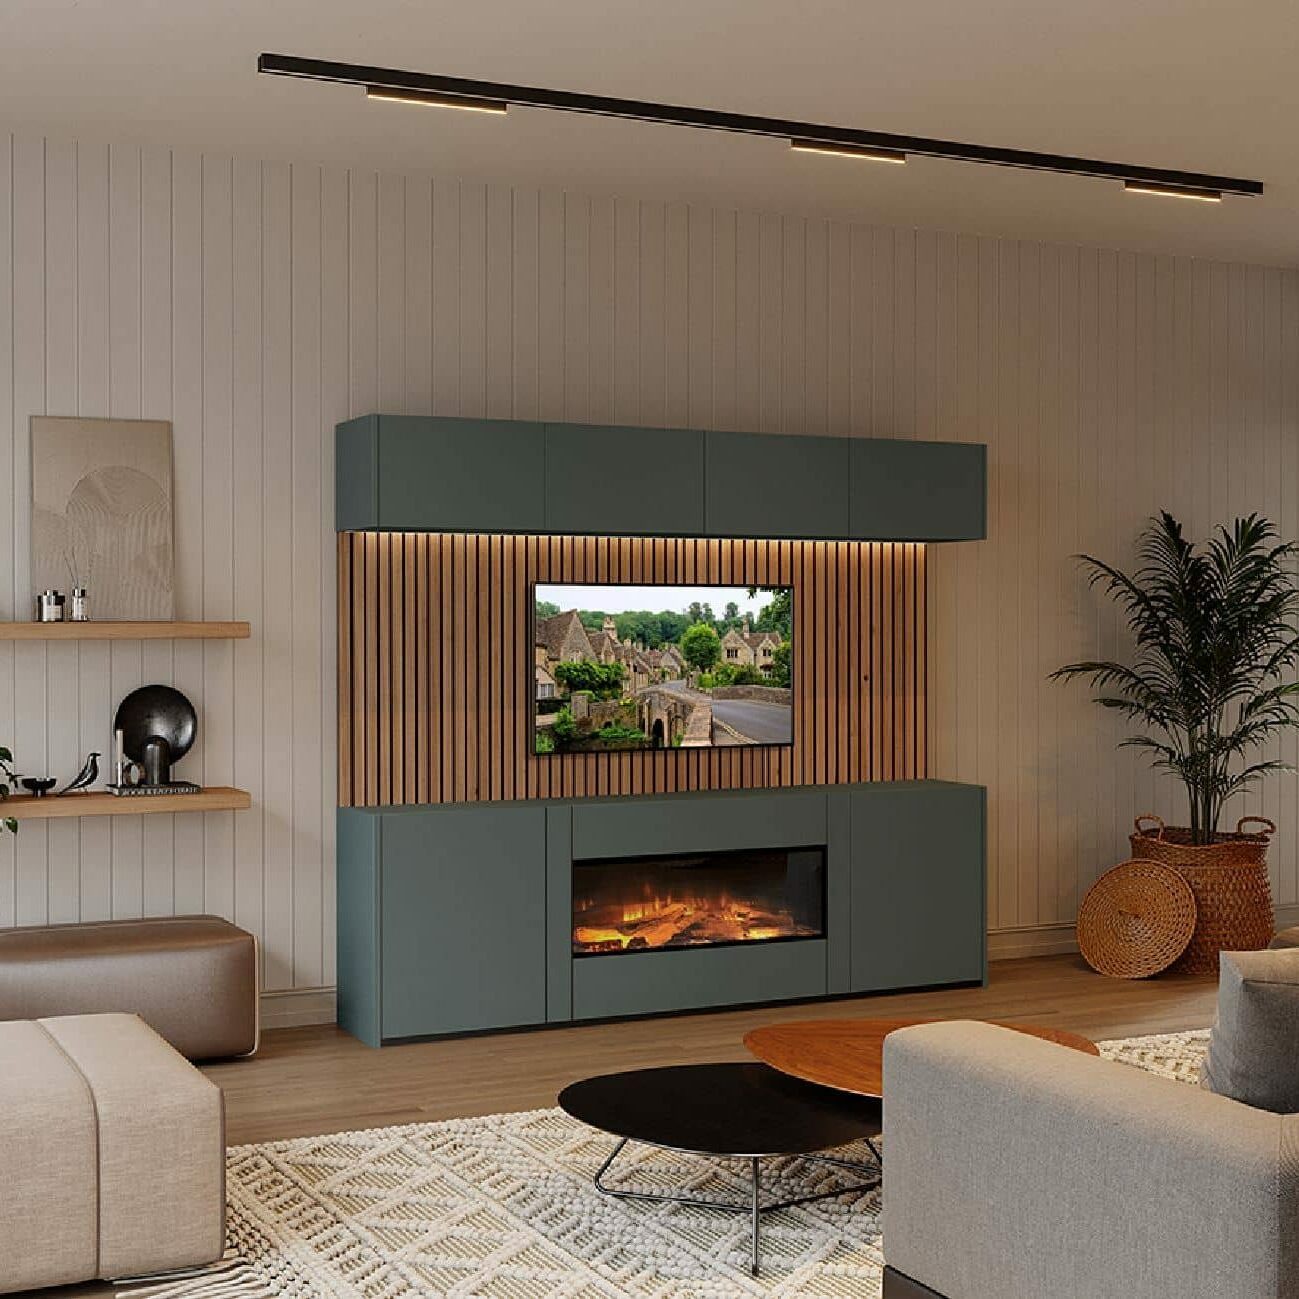 Bexley small fireplace and entertainment center